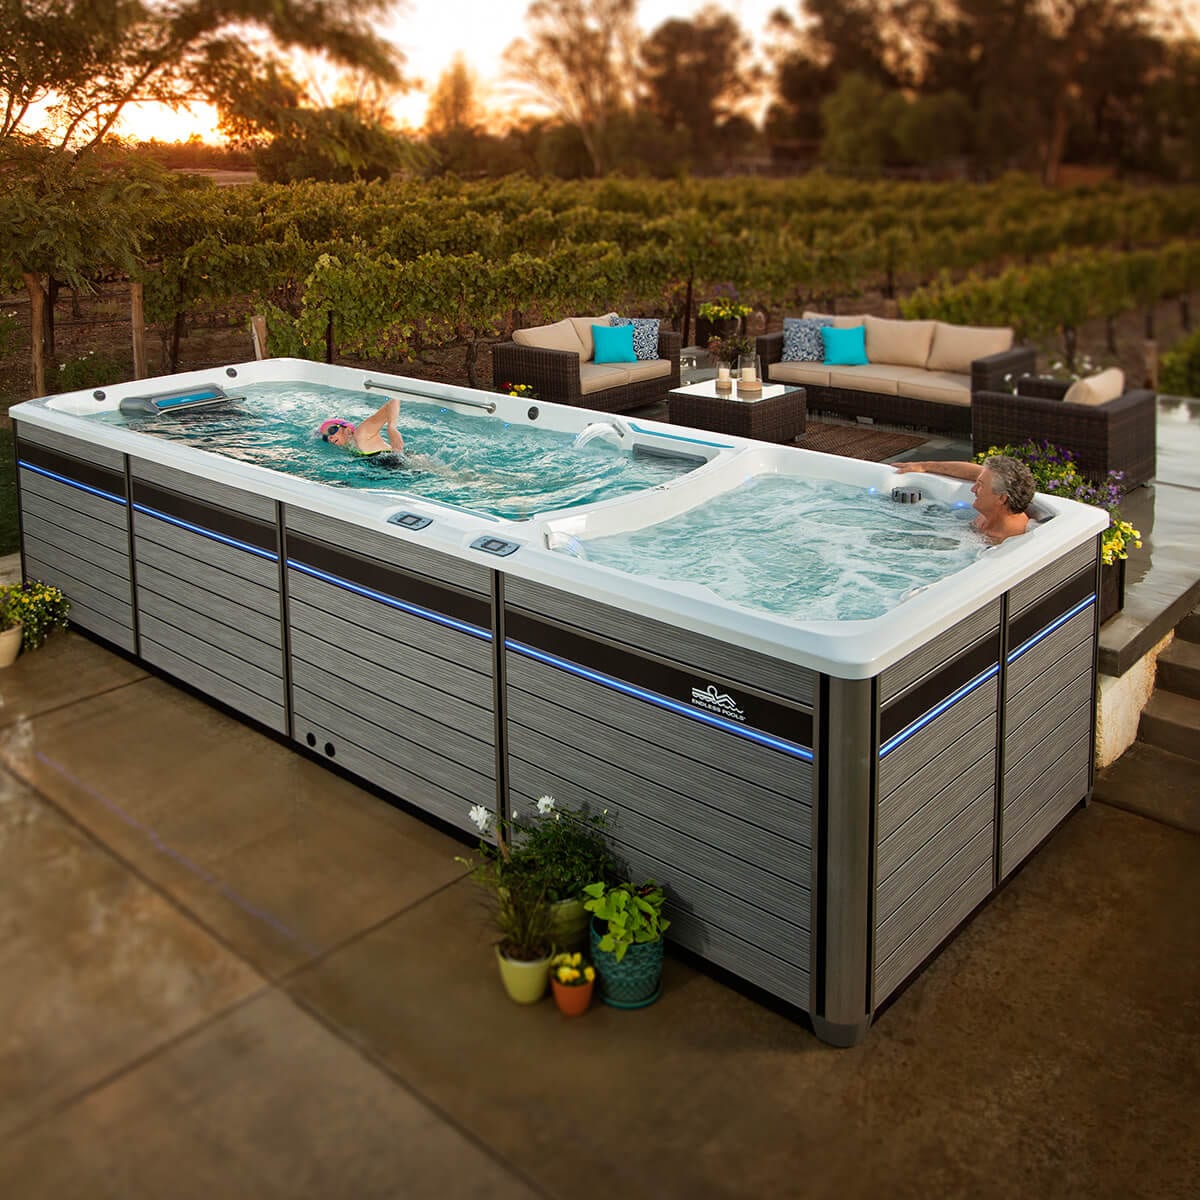 Awesome Benefits of a Swim Spas, Lap Pools Truckee